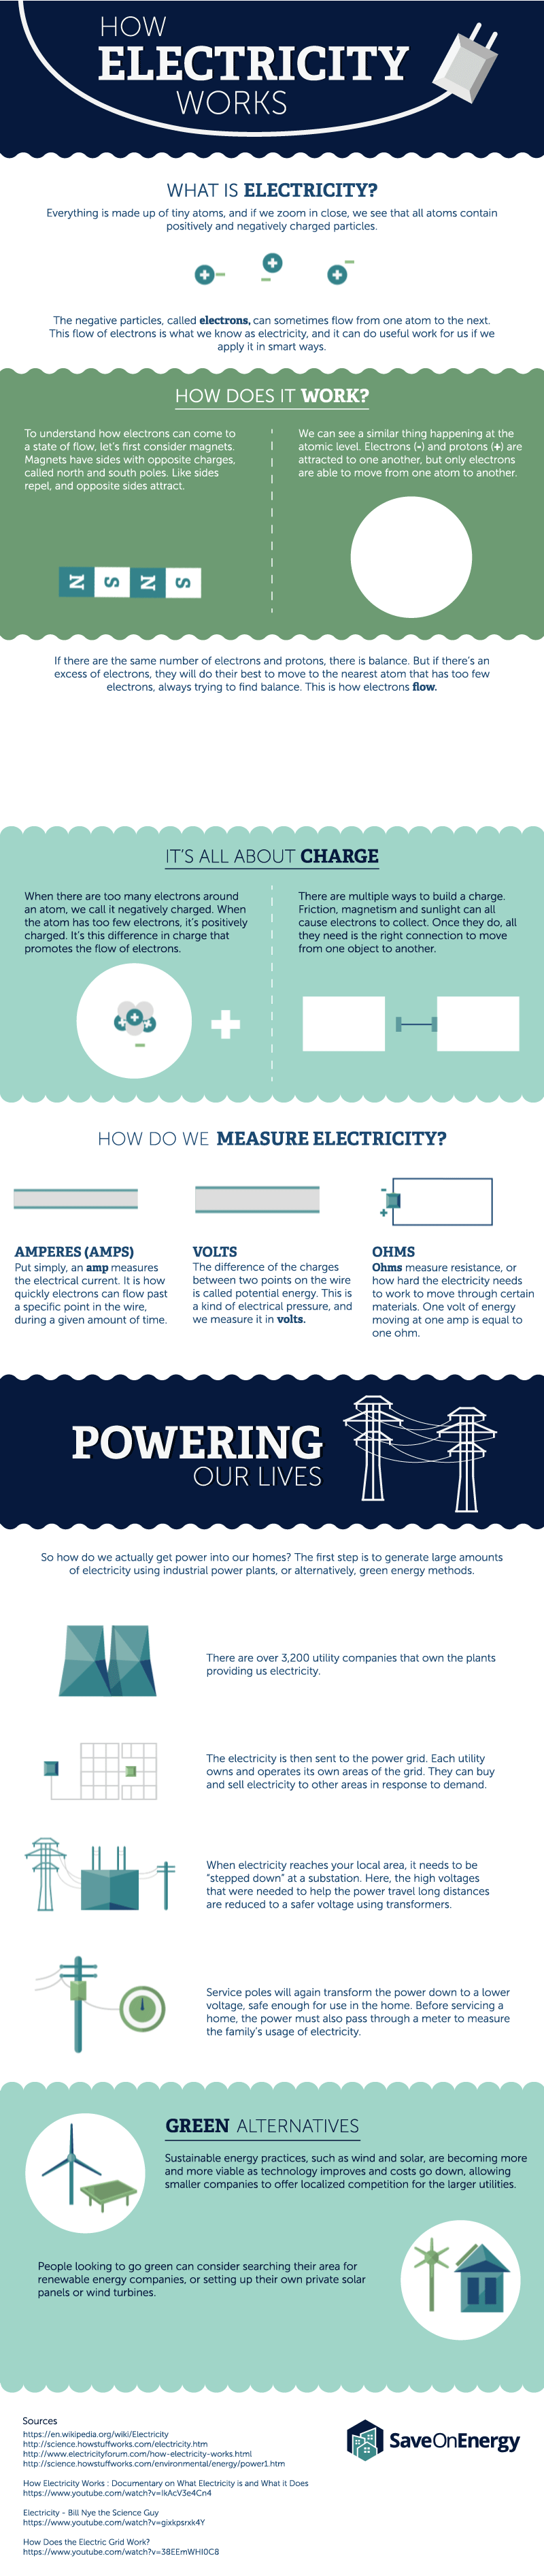 How Electricity Works - An Animated Guide | Educational Innovations Blog